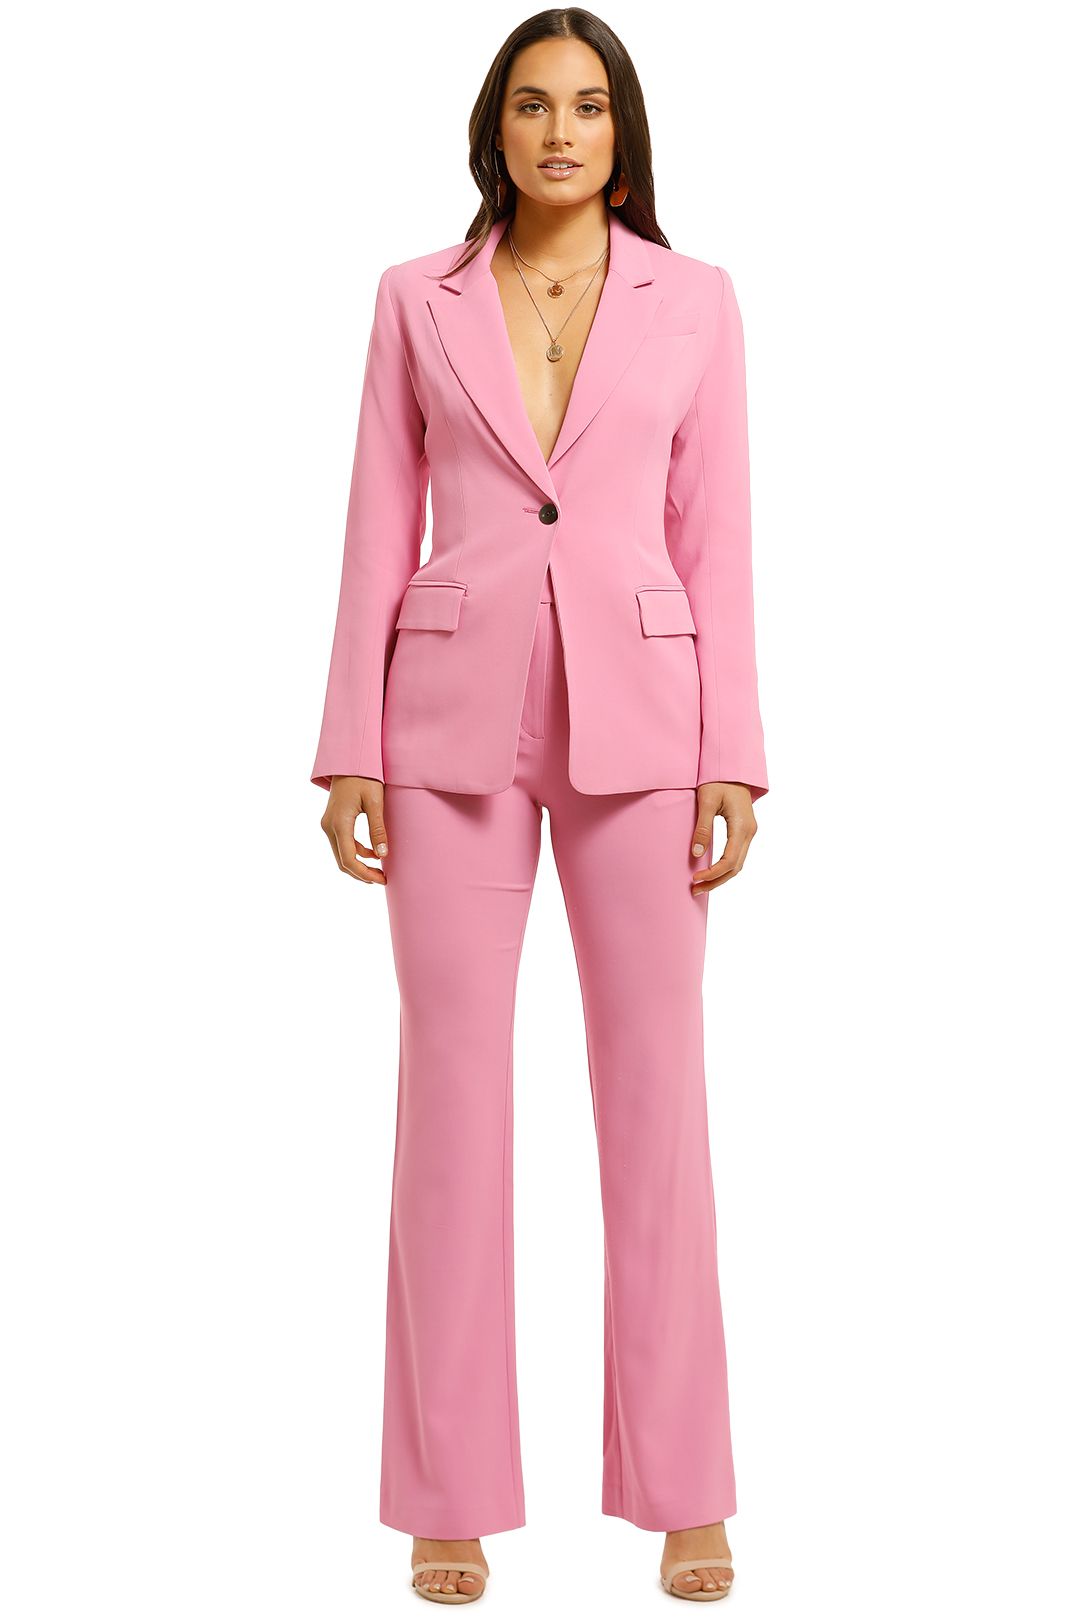 Ginger-and-Smart-Elixer-Jacket-and-Pant-Set-Passion-Pink-Front